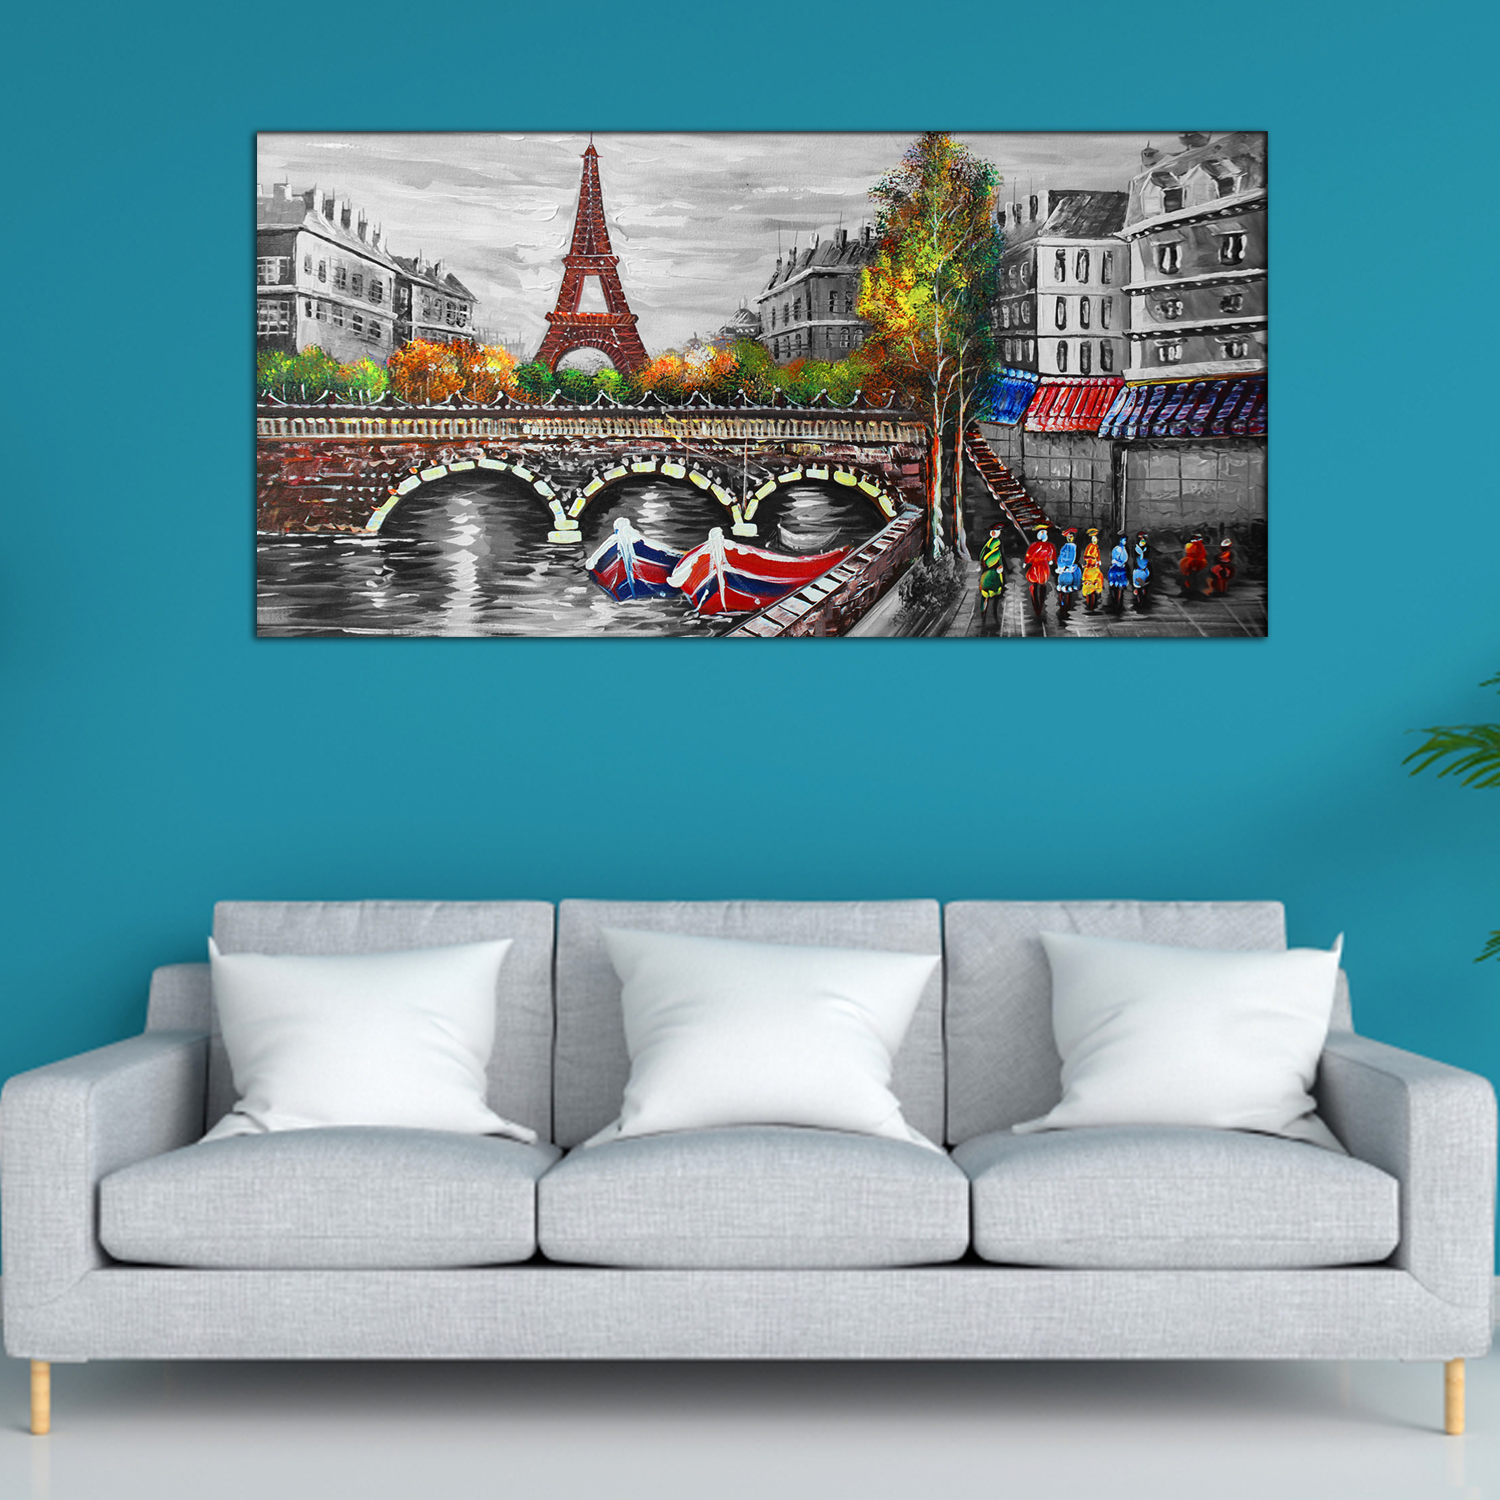 Eiffel Tower city view Canvas Print Wall Painting